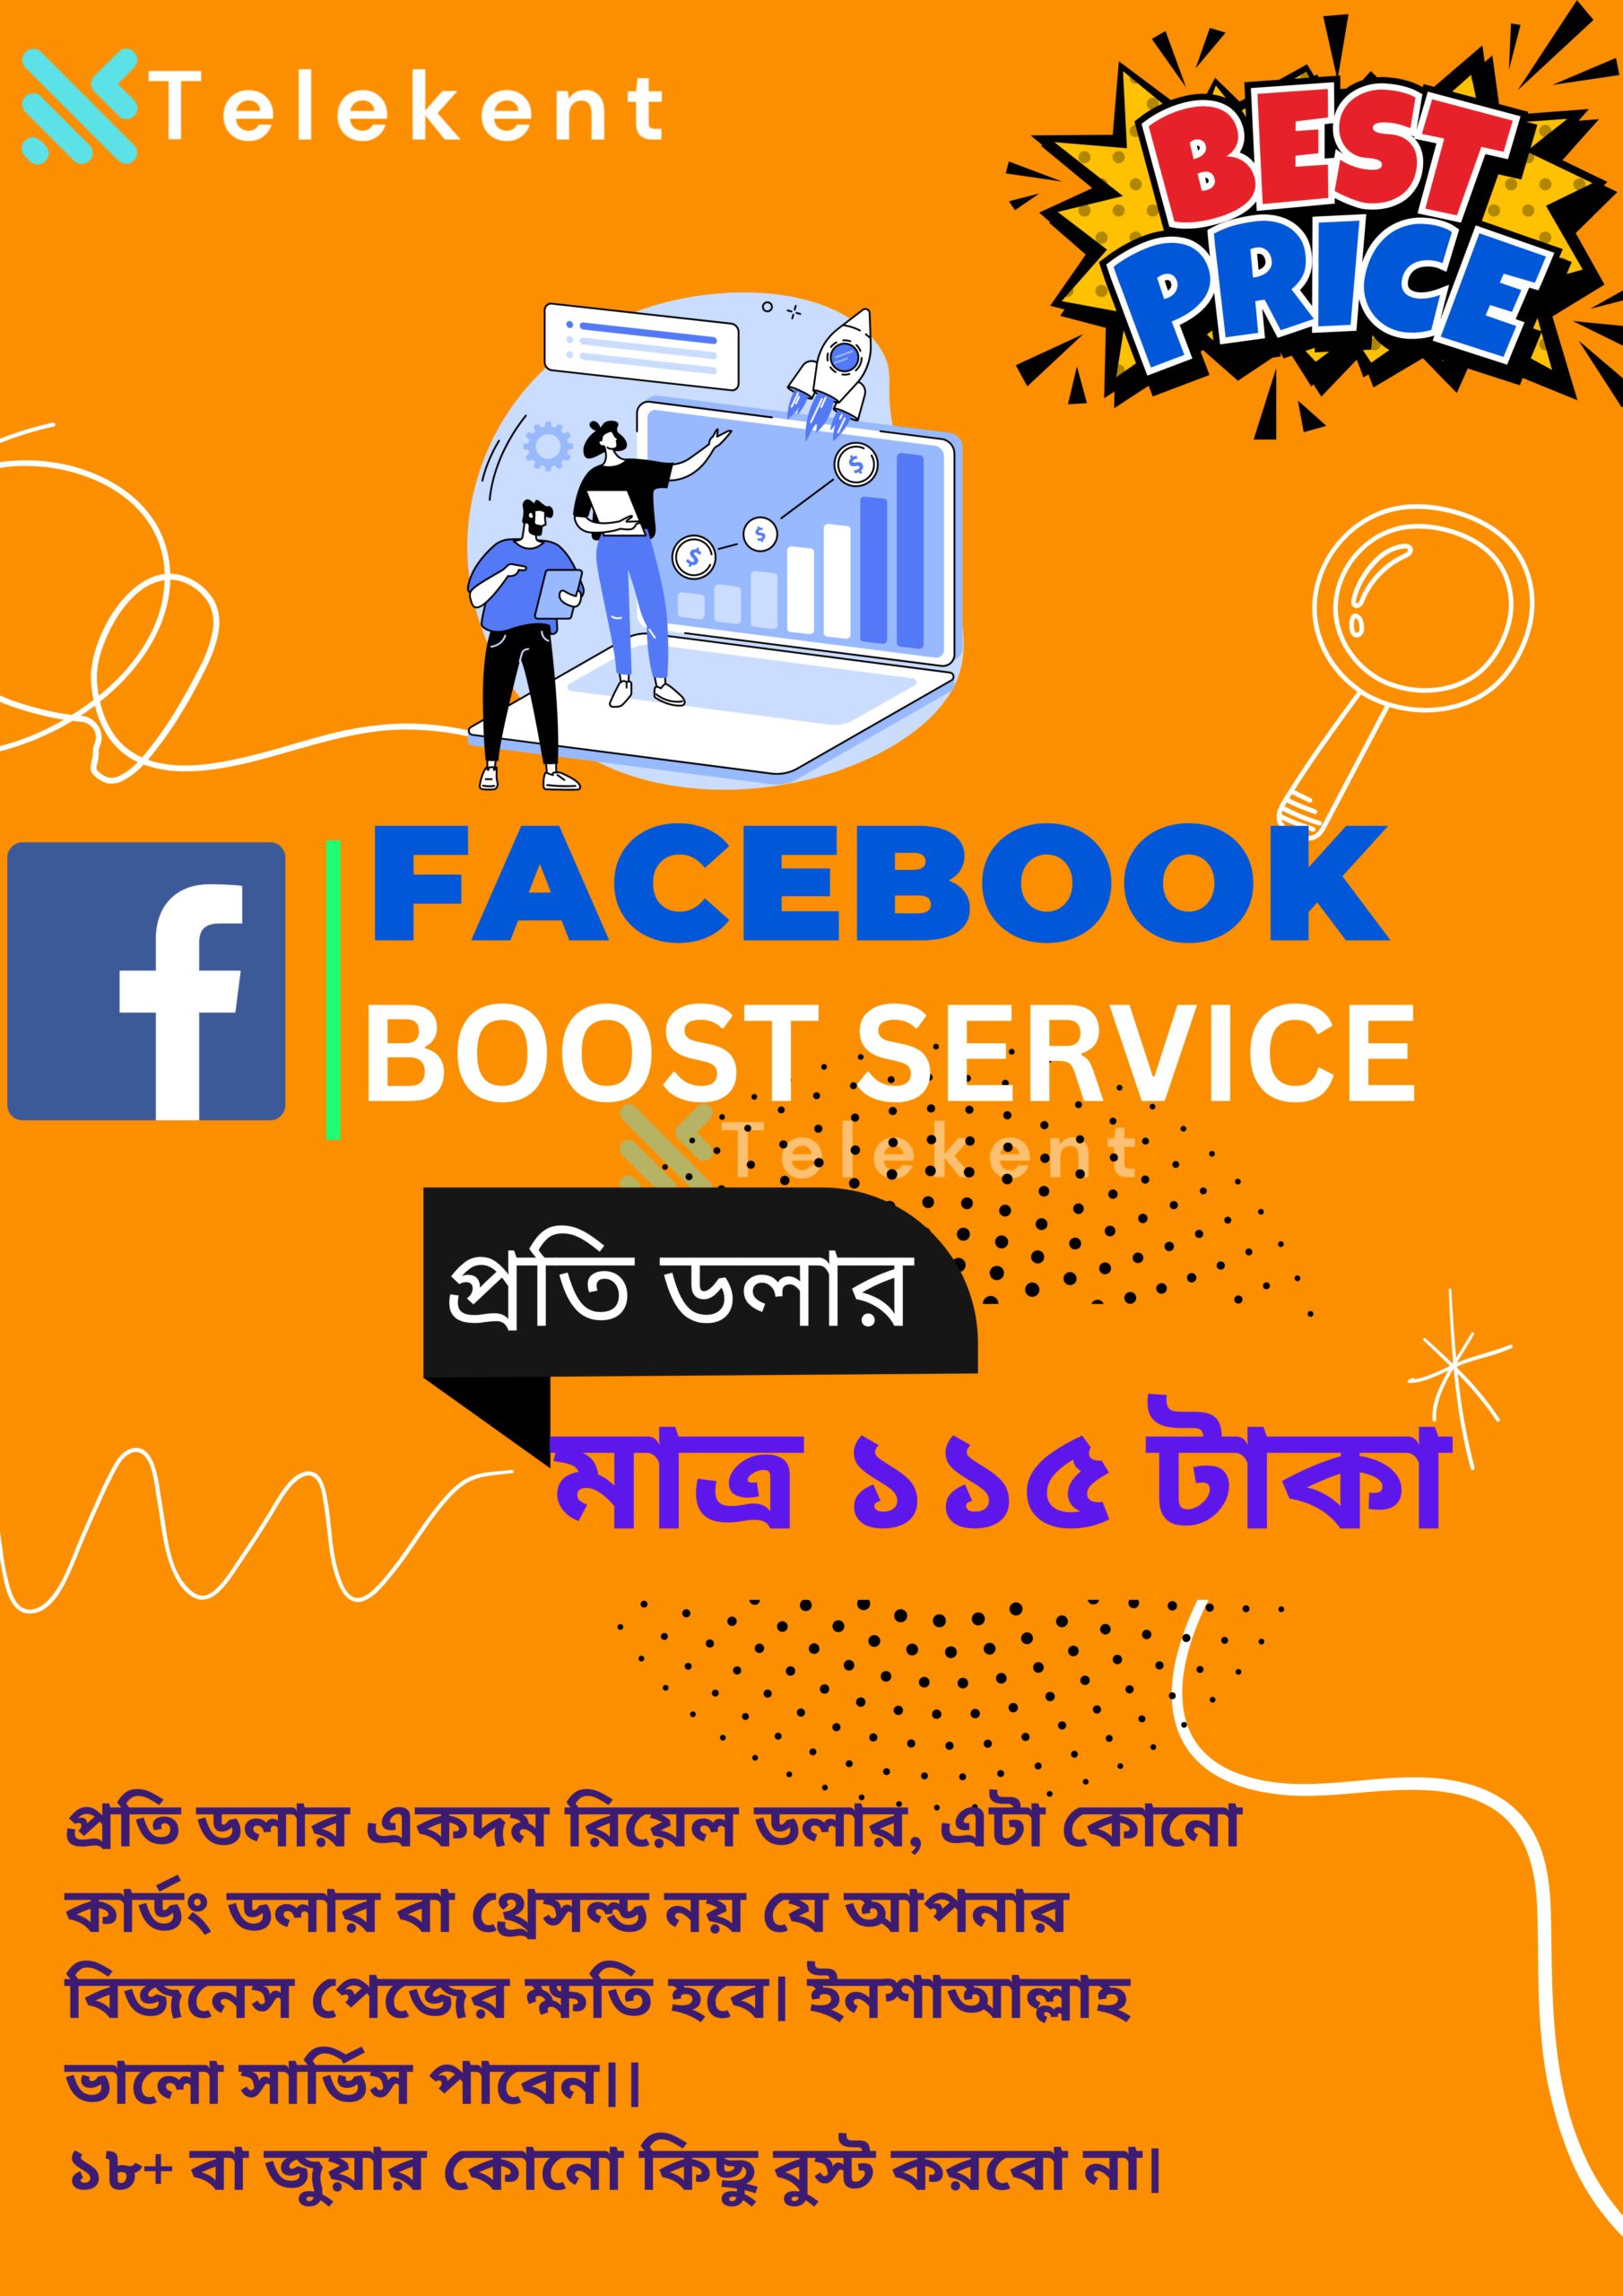 159414Facebook Boosting / Promoting Service Available 5$